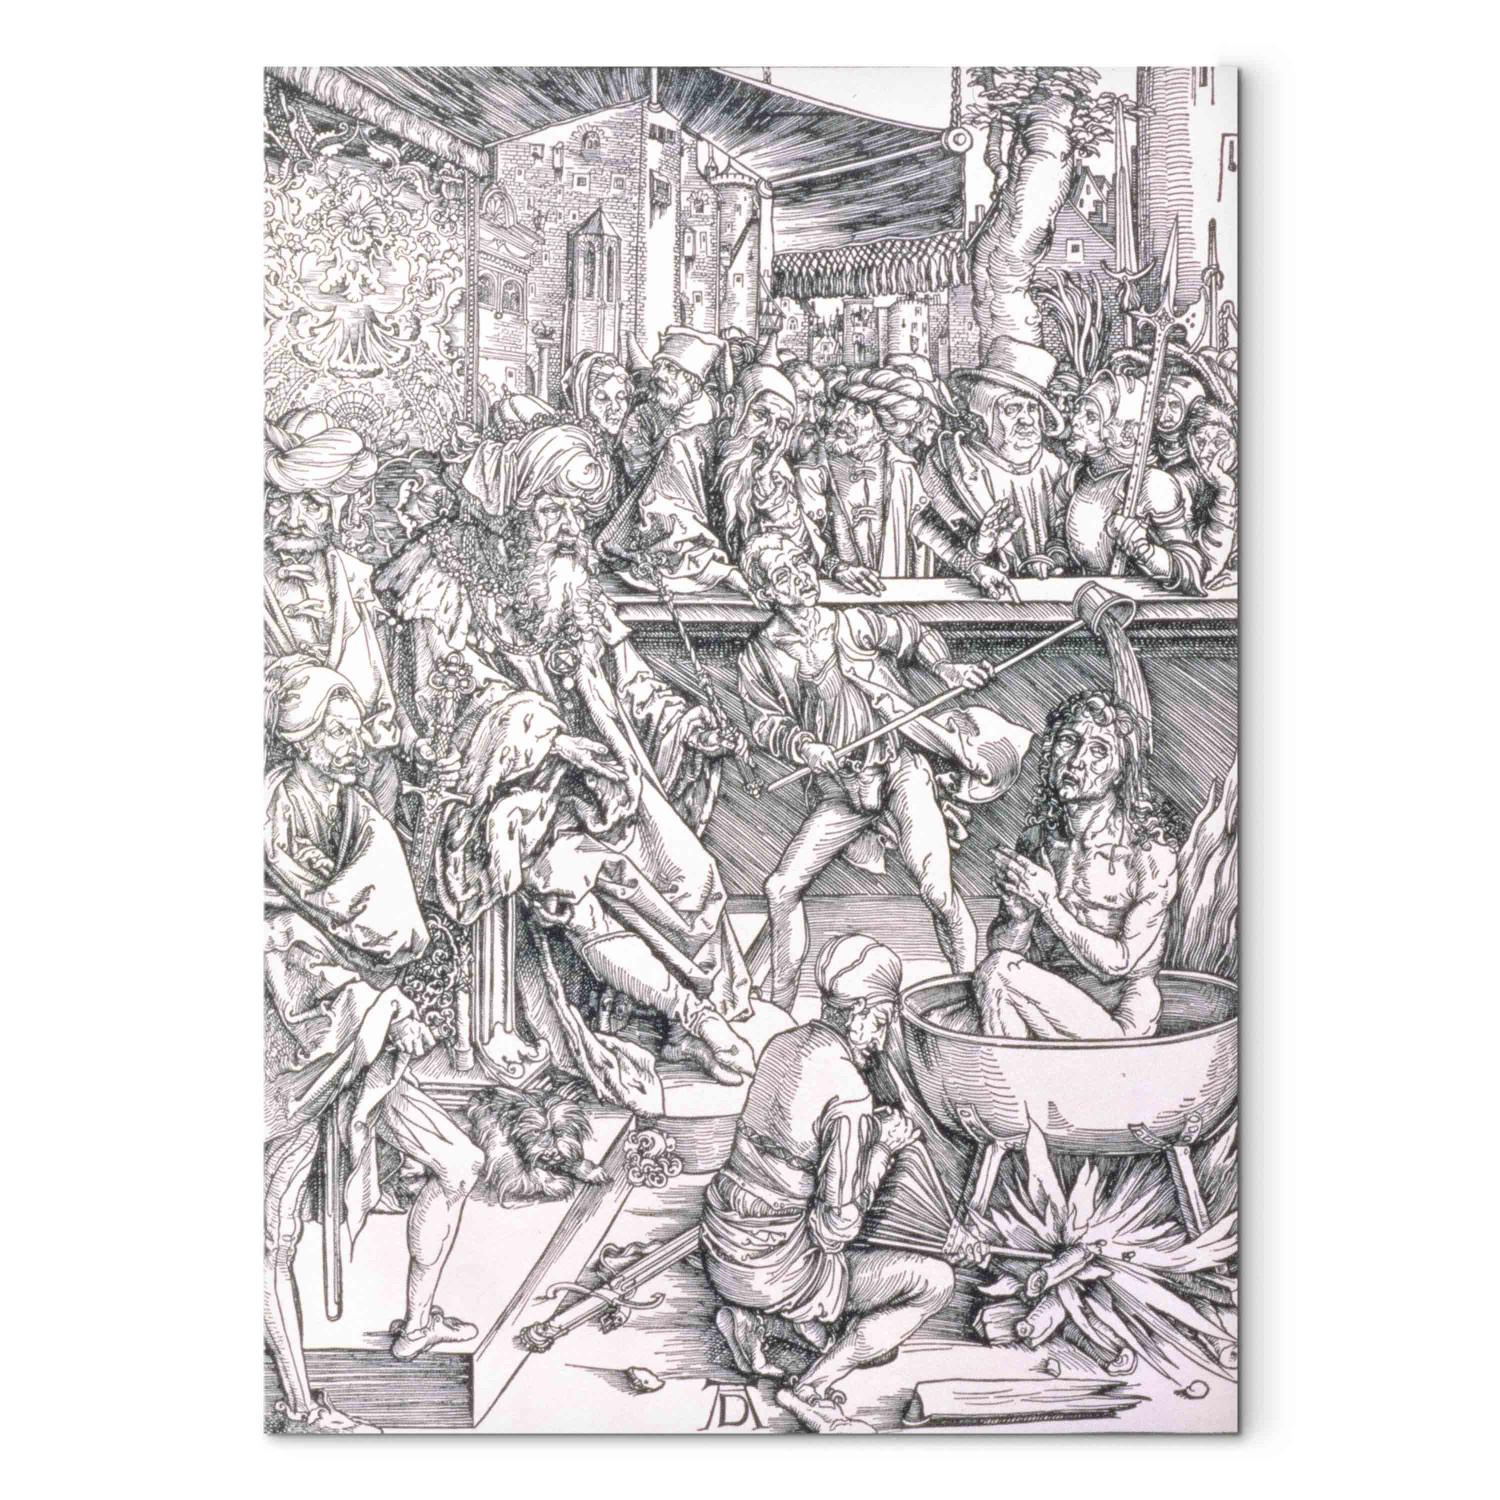 Reproducción de cuadro The Torture of St. John the Evangelist, from the 'Apocalypse' series or 'The Revelations of St. John the Divine', introductory page, pub.